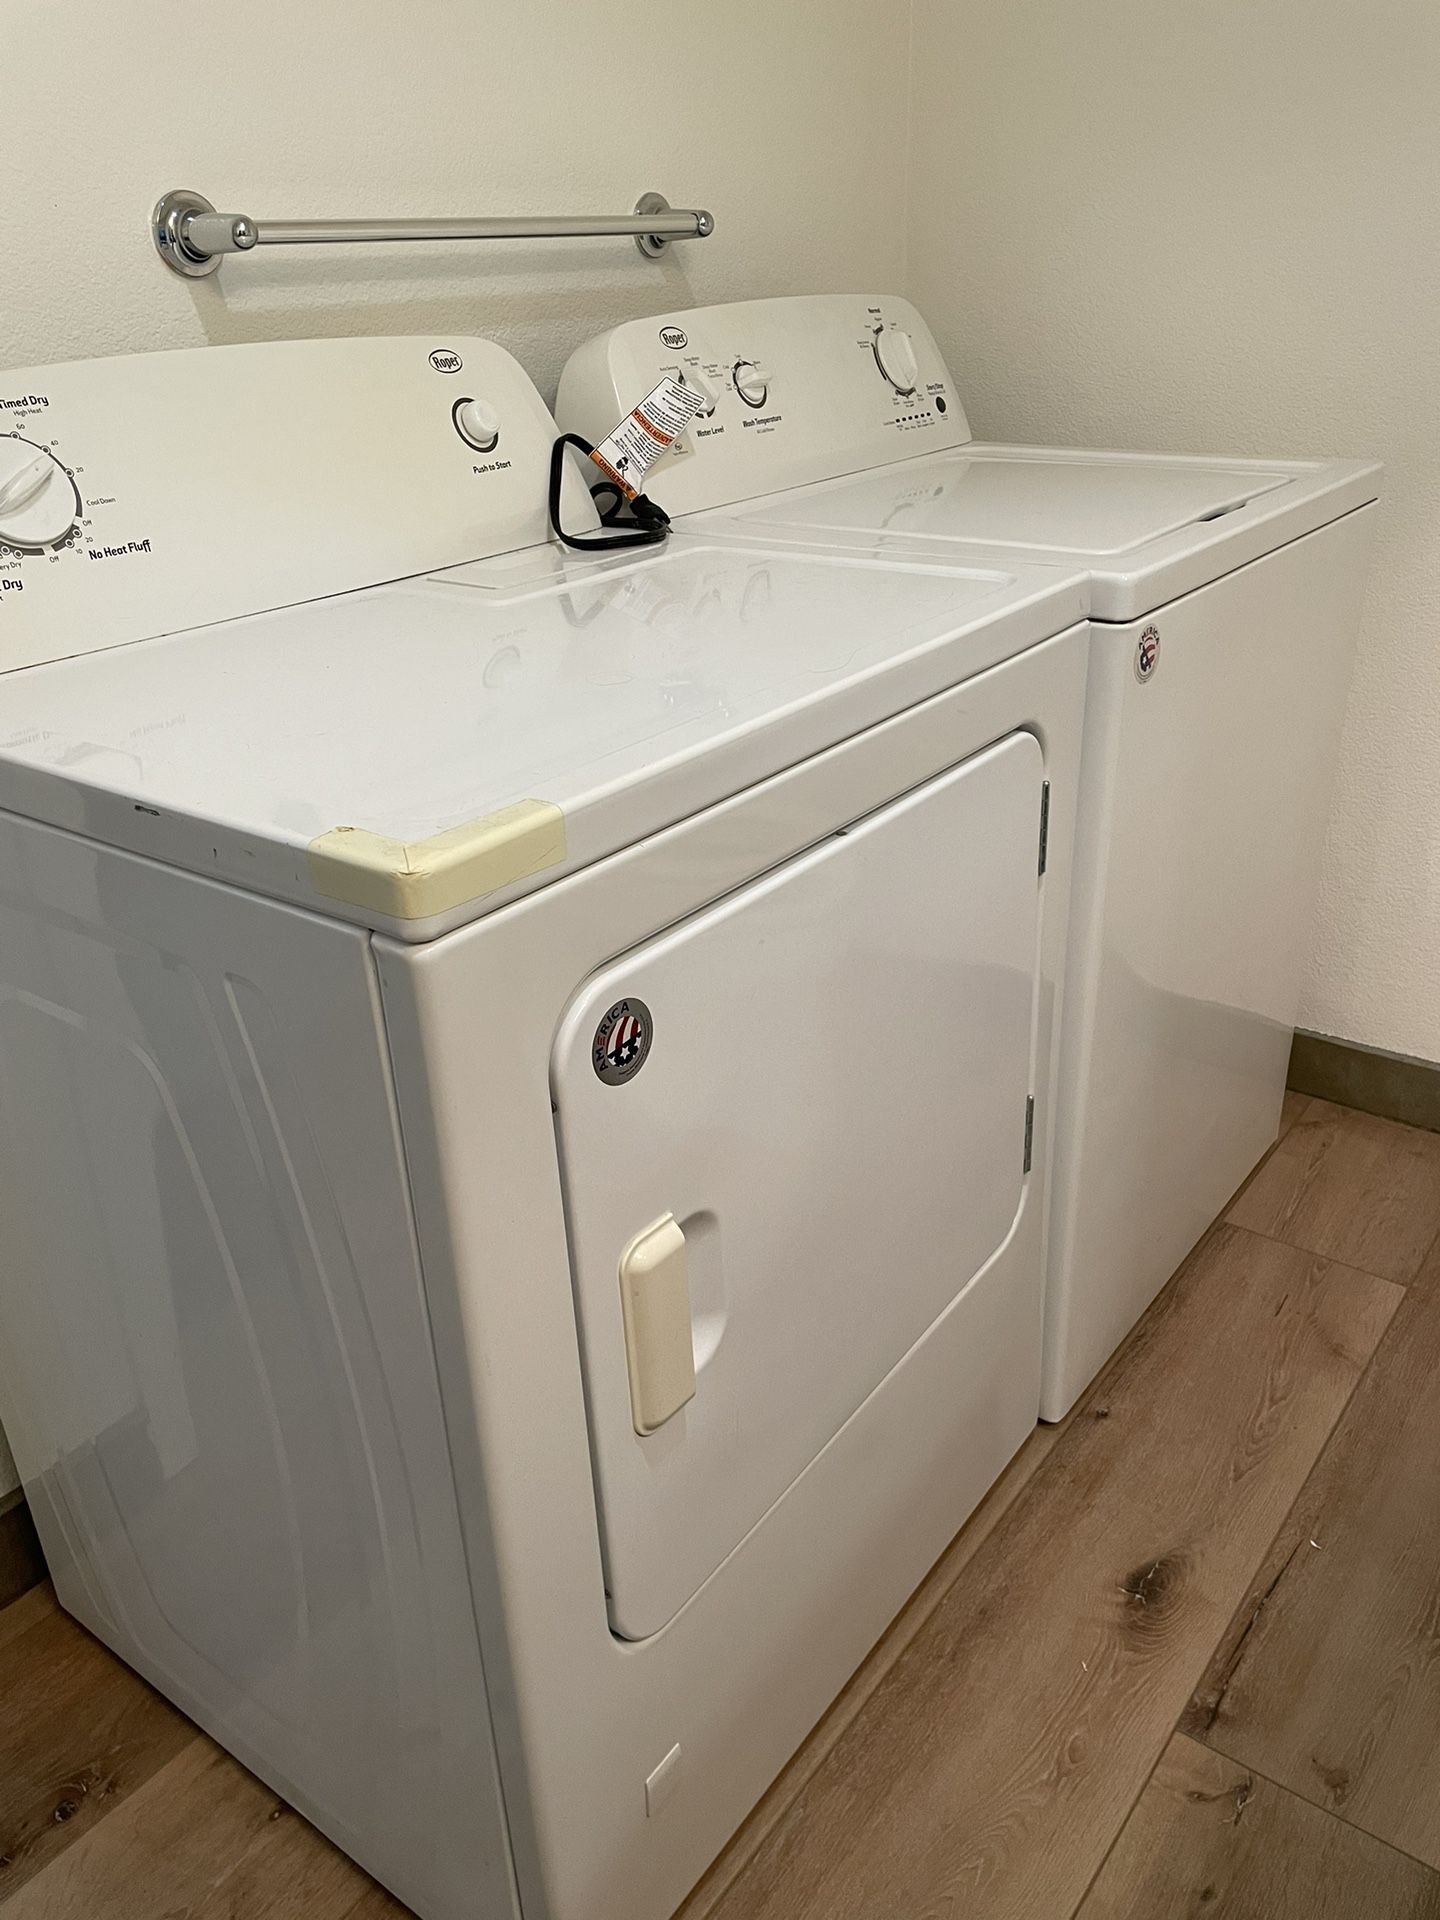 FREE Roper Washer And Dryer Set For Sale